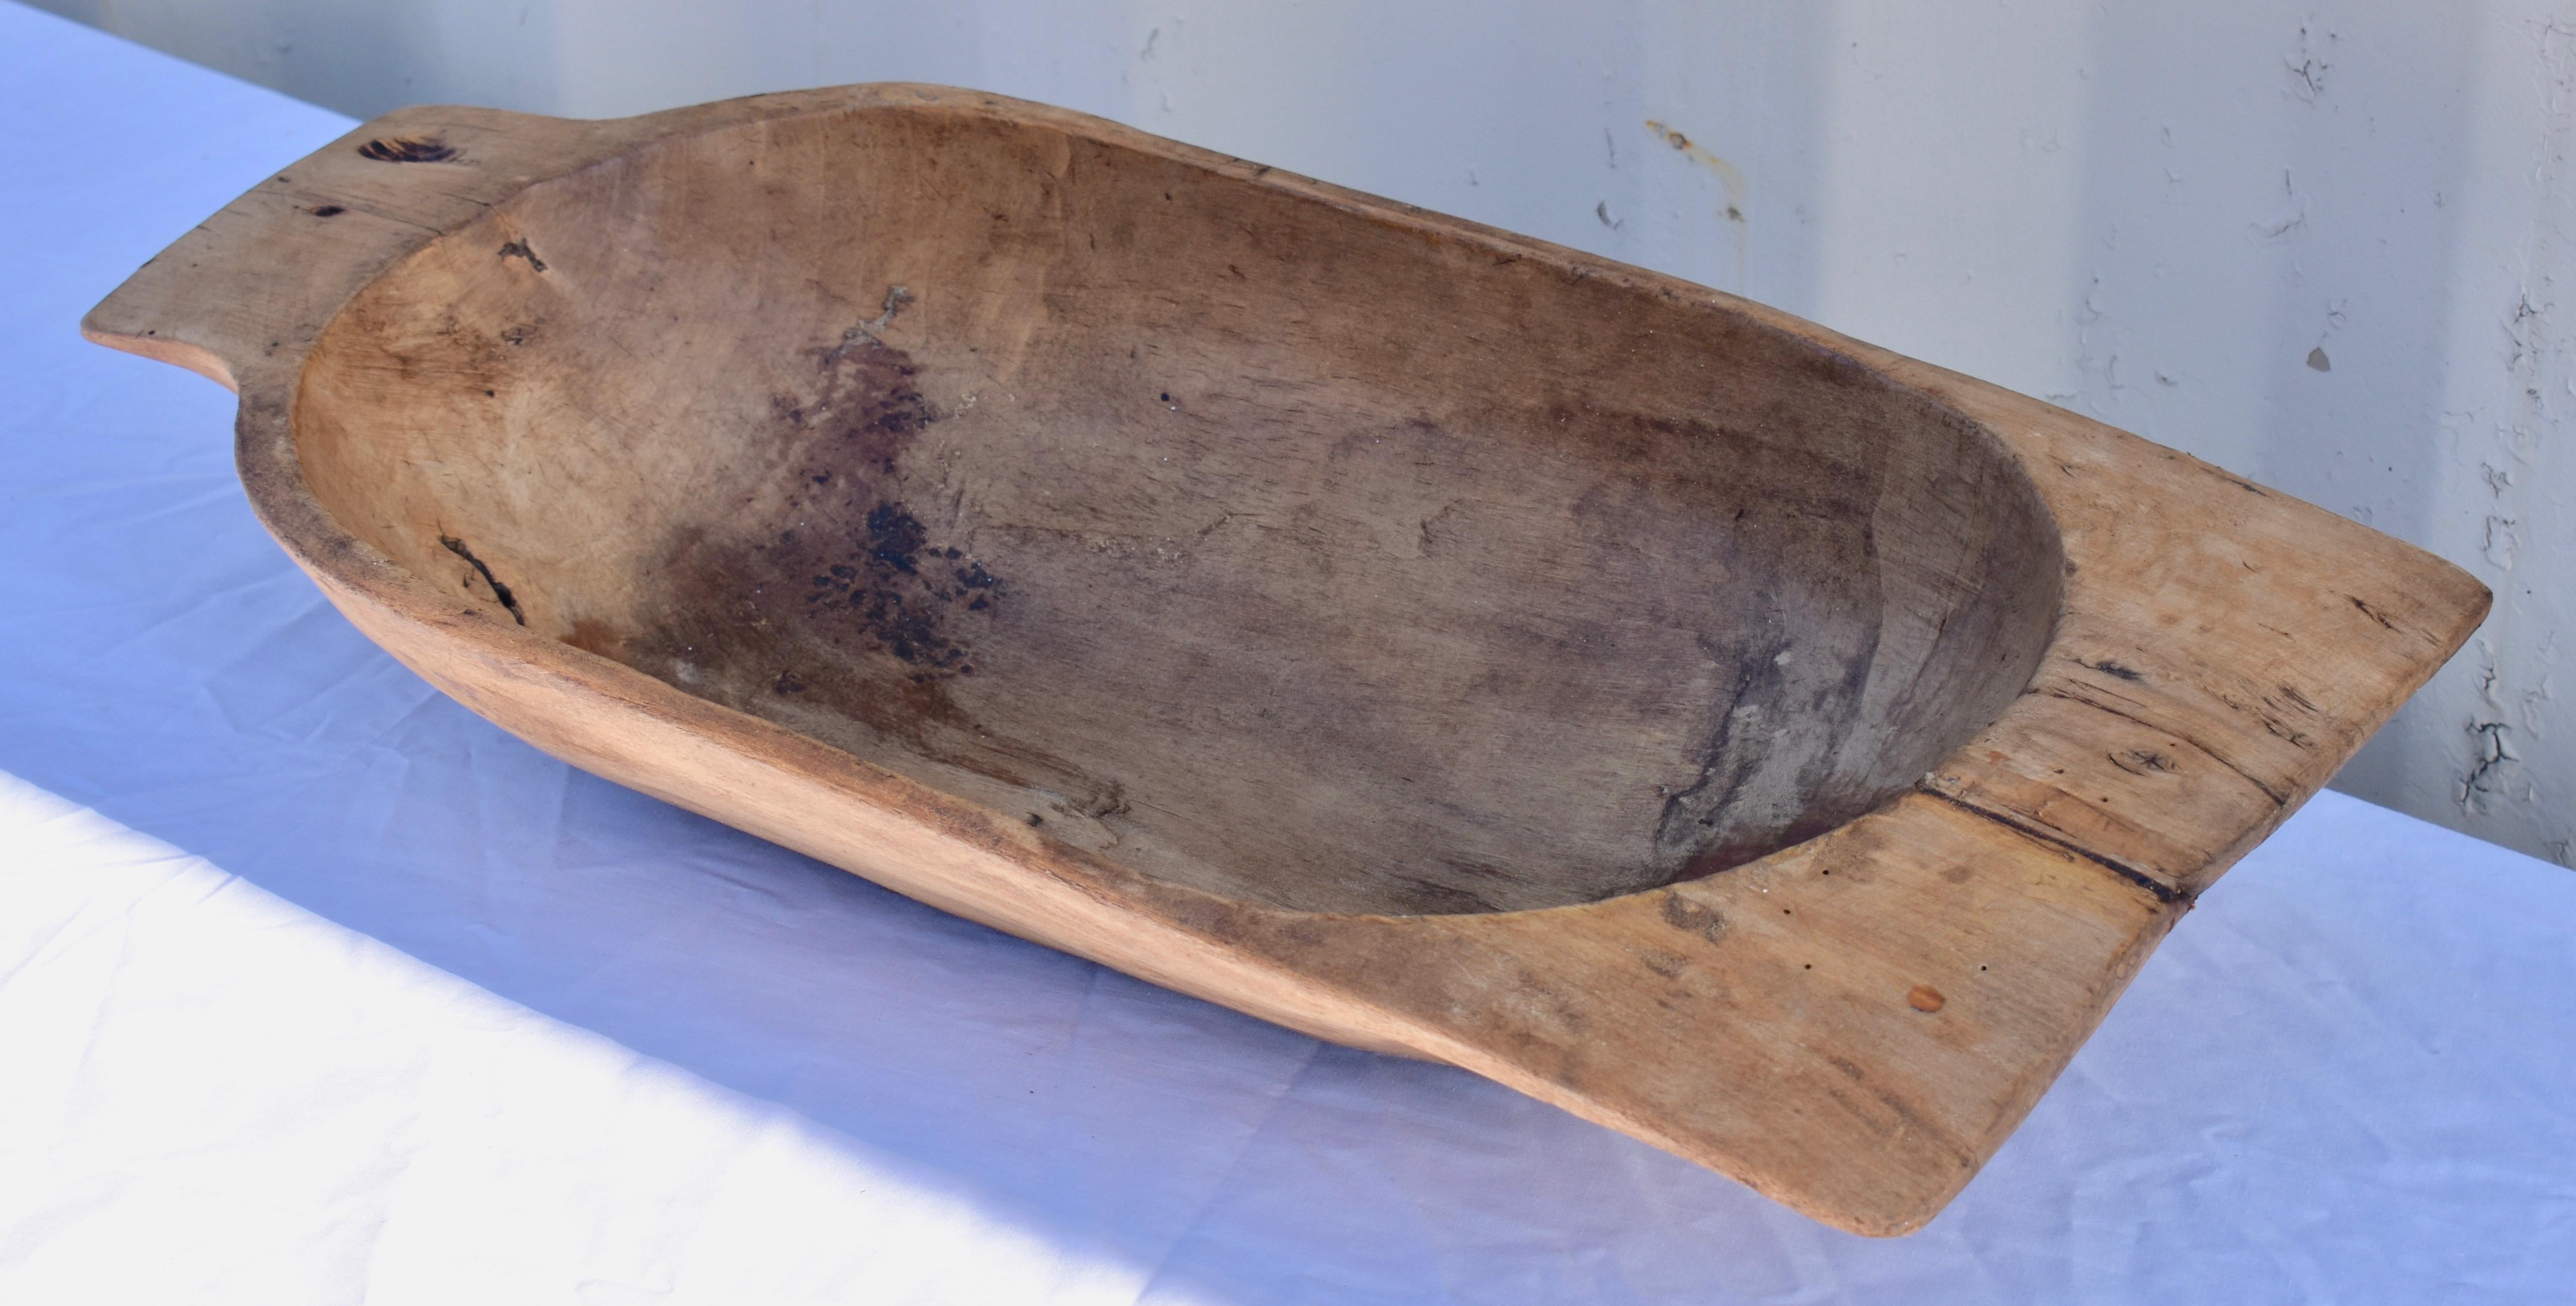 Our European antique wooden dough bowls or trogs were hand-hewn from whole split logs. They feature remarkable handiwork and a beautiful patina, especially when viewed from the underside. They all show signs of purposeful use. Some have small